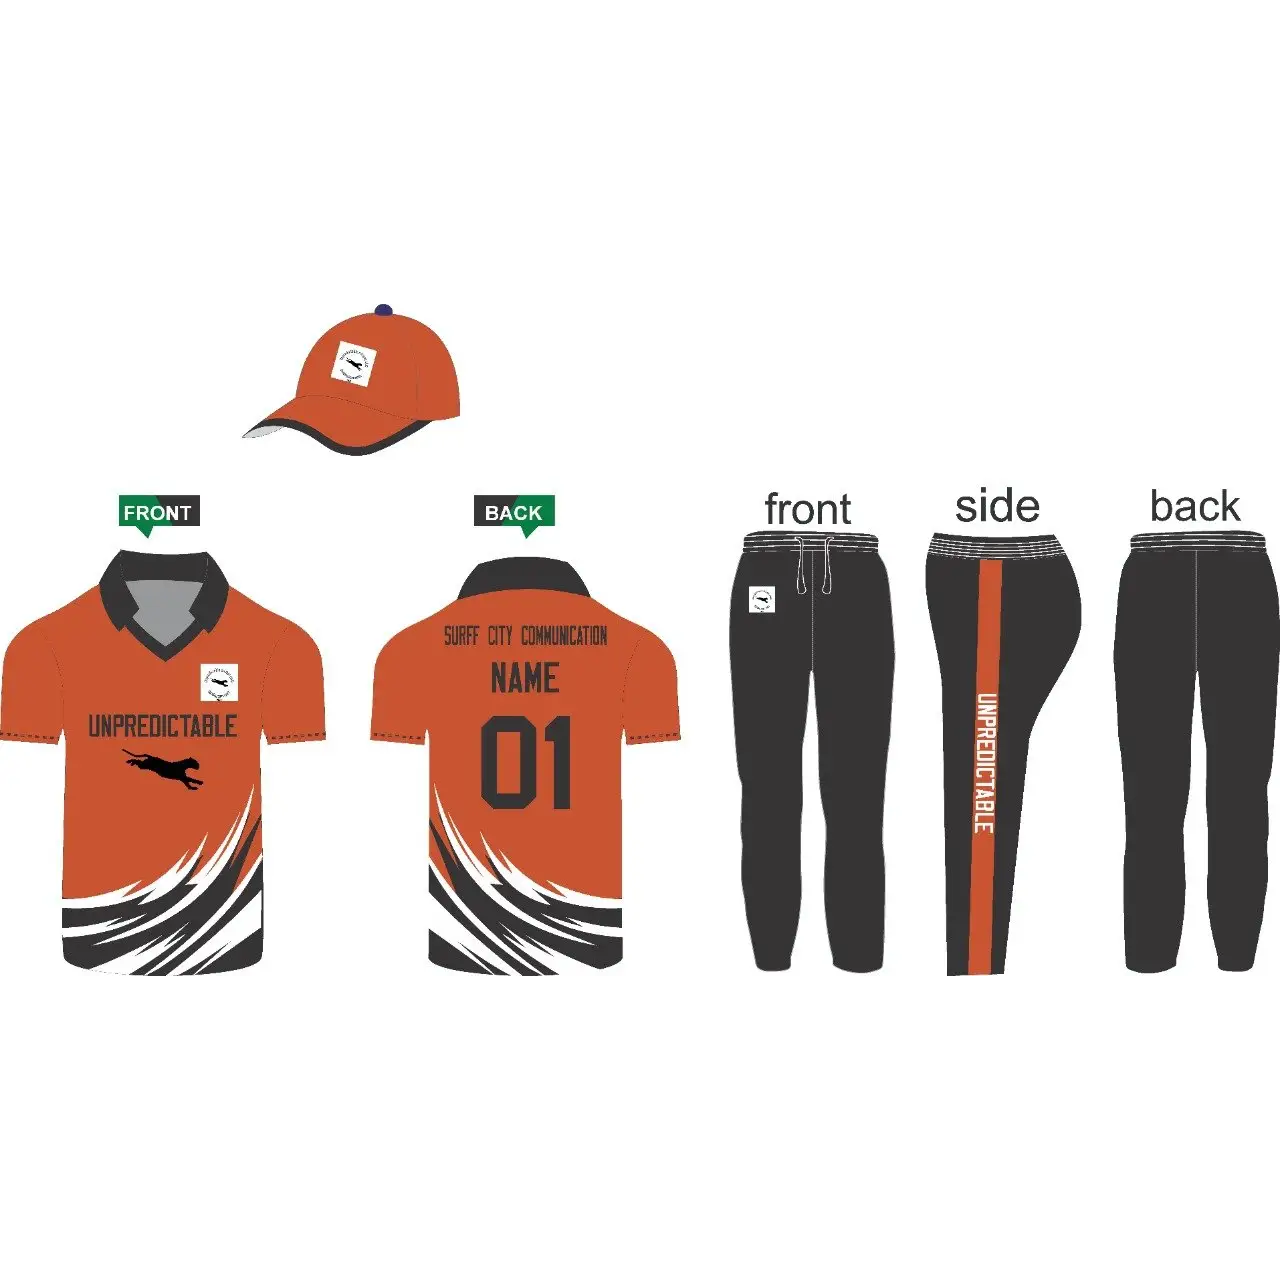 Sports Jersey Trouser and Cap Made to Order Fully Customizable Black Orange - S-XL - Custom Cricket Wear 3PC Full